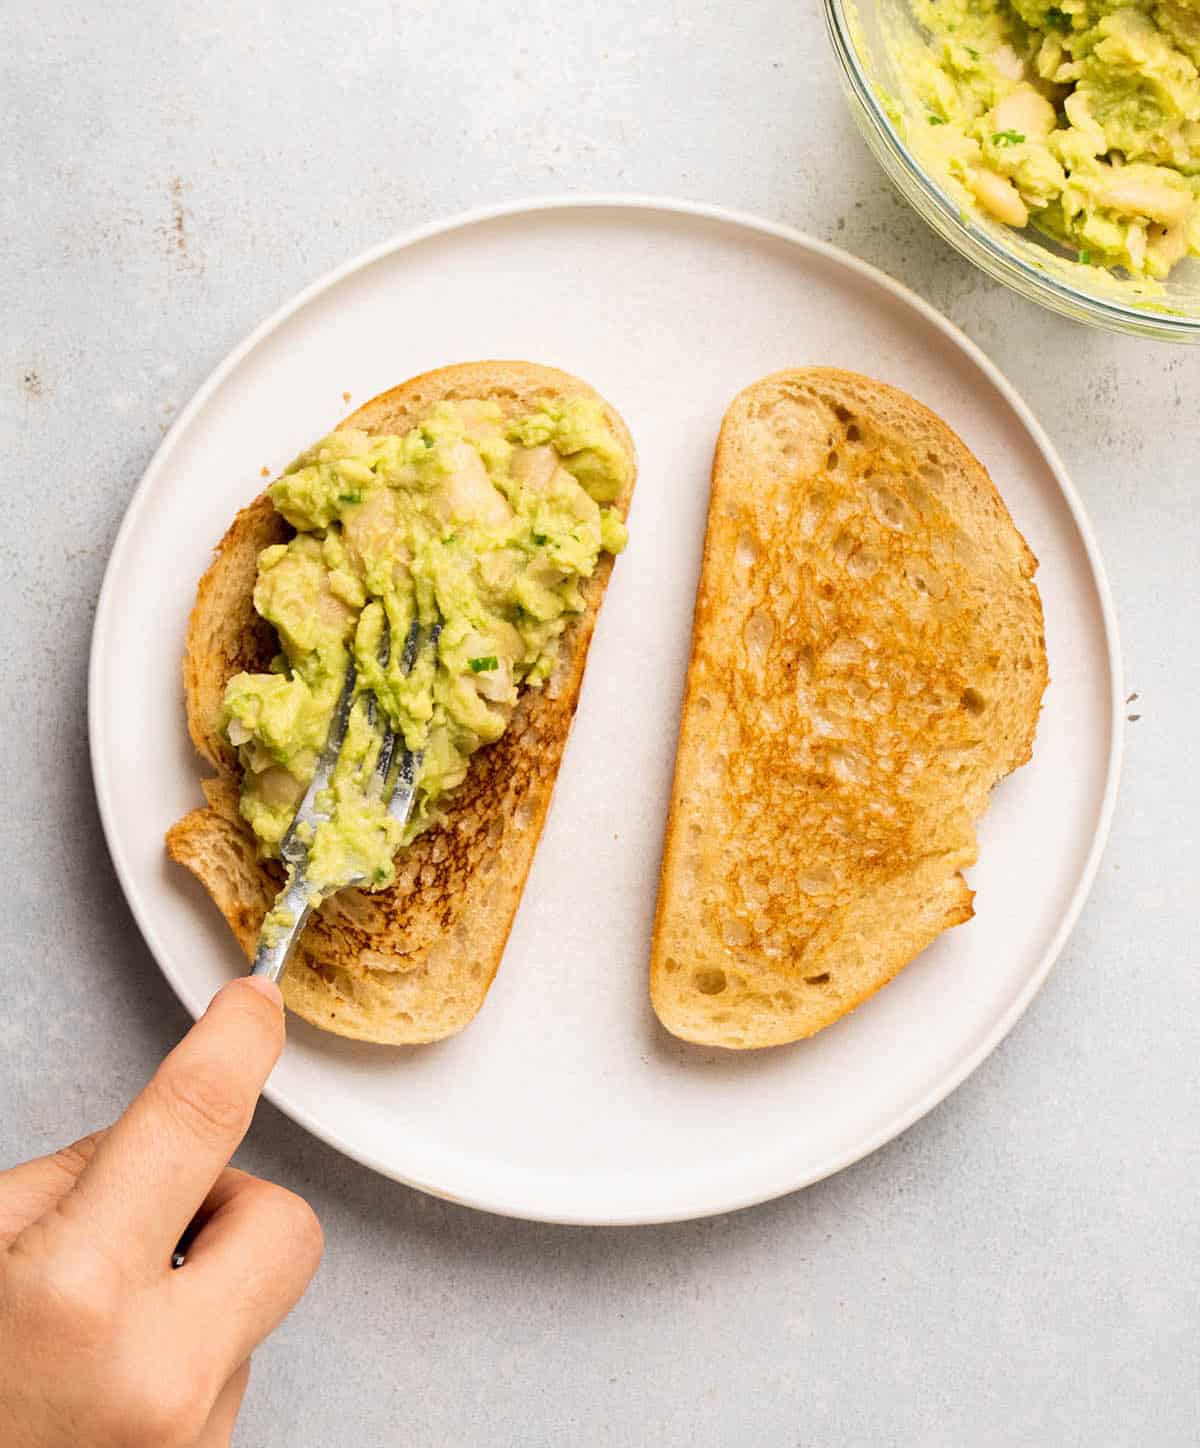 Spreading avocado and beans over toast with a fork.